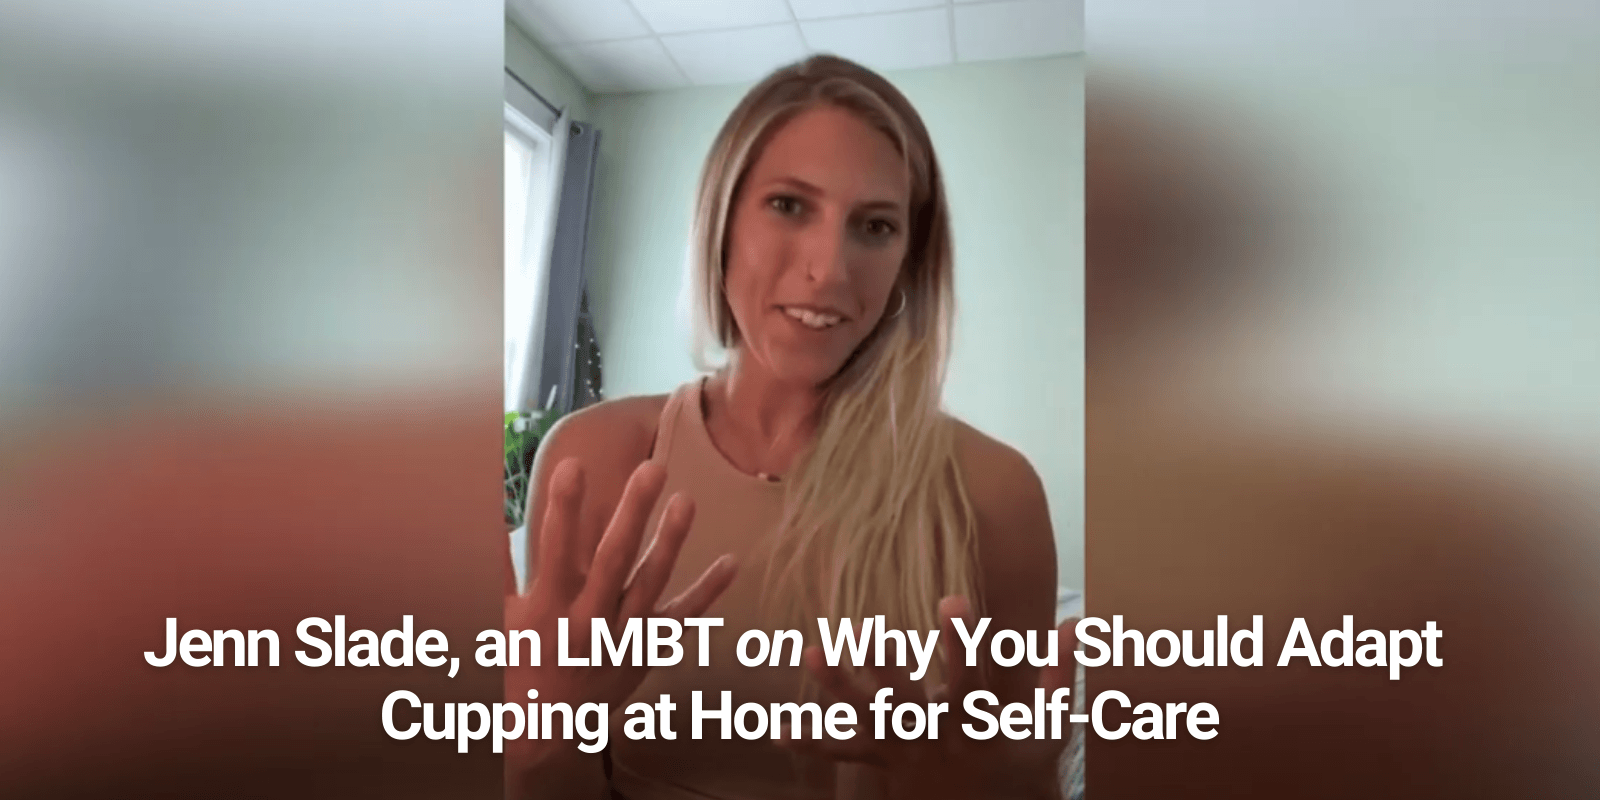 GO CUP YOURSELF Part 1: Cupping for Self-Care - Lure Essentials